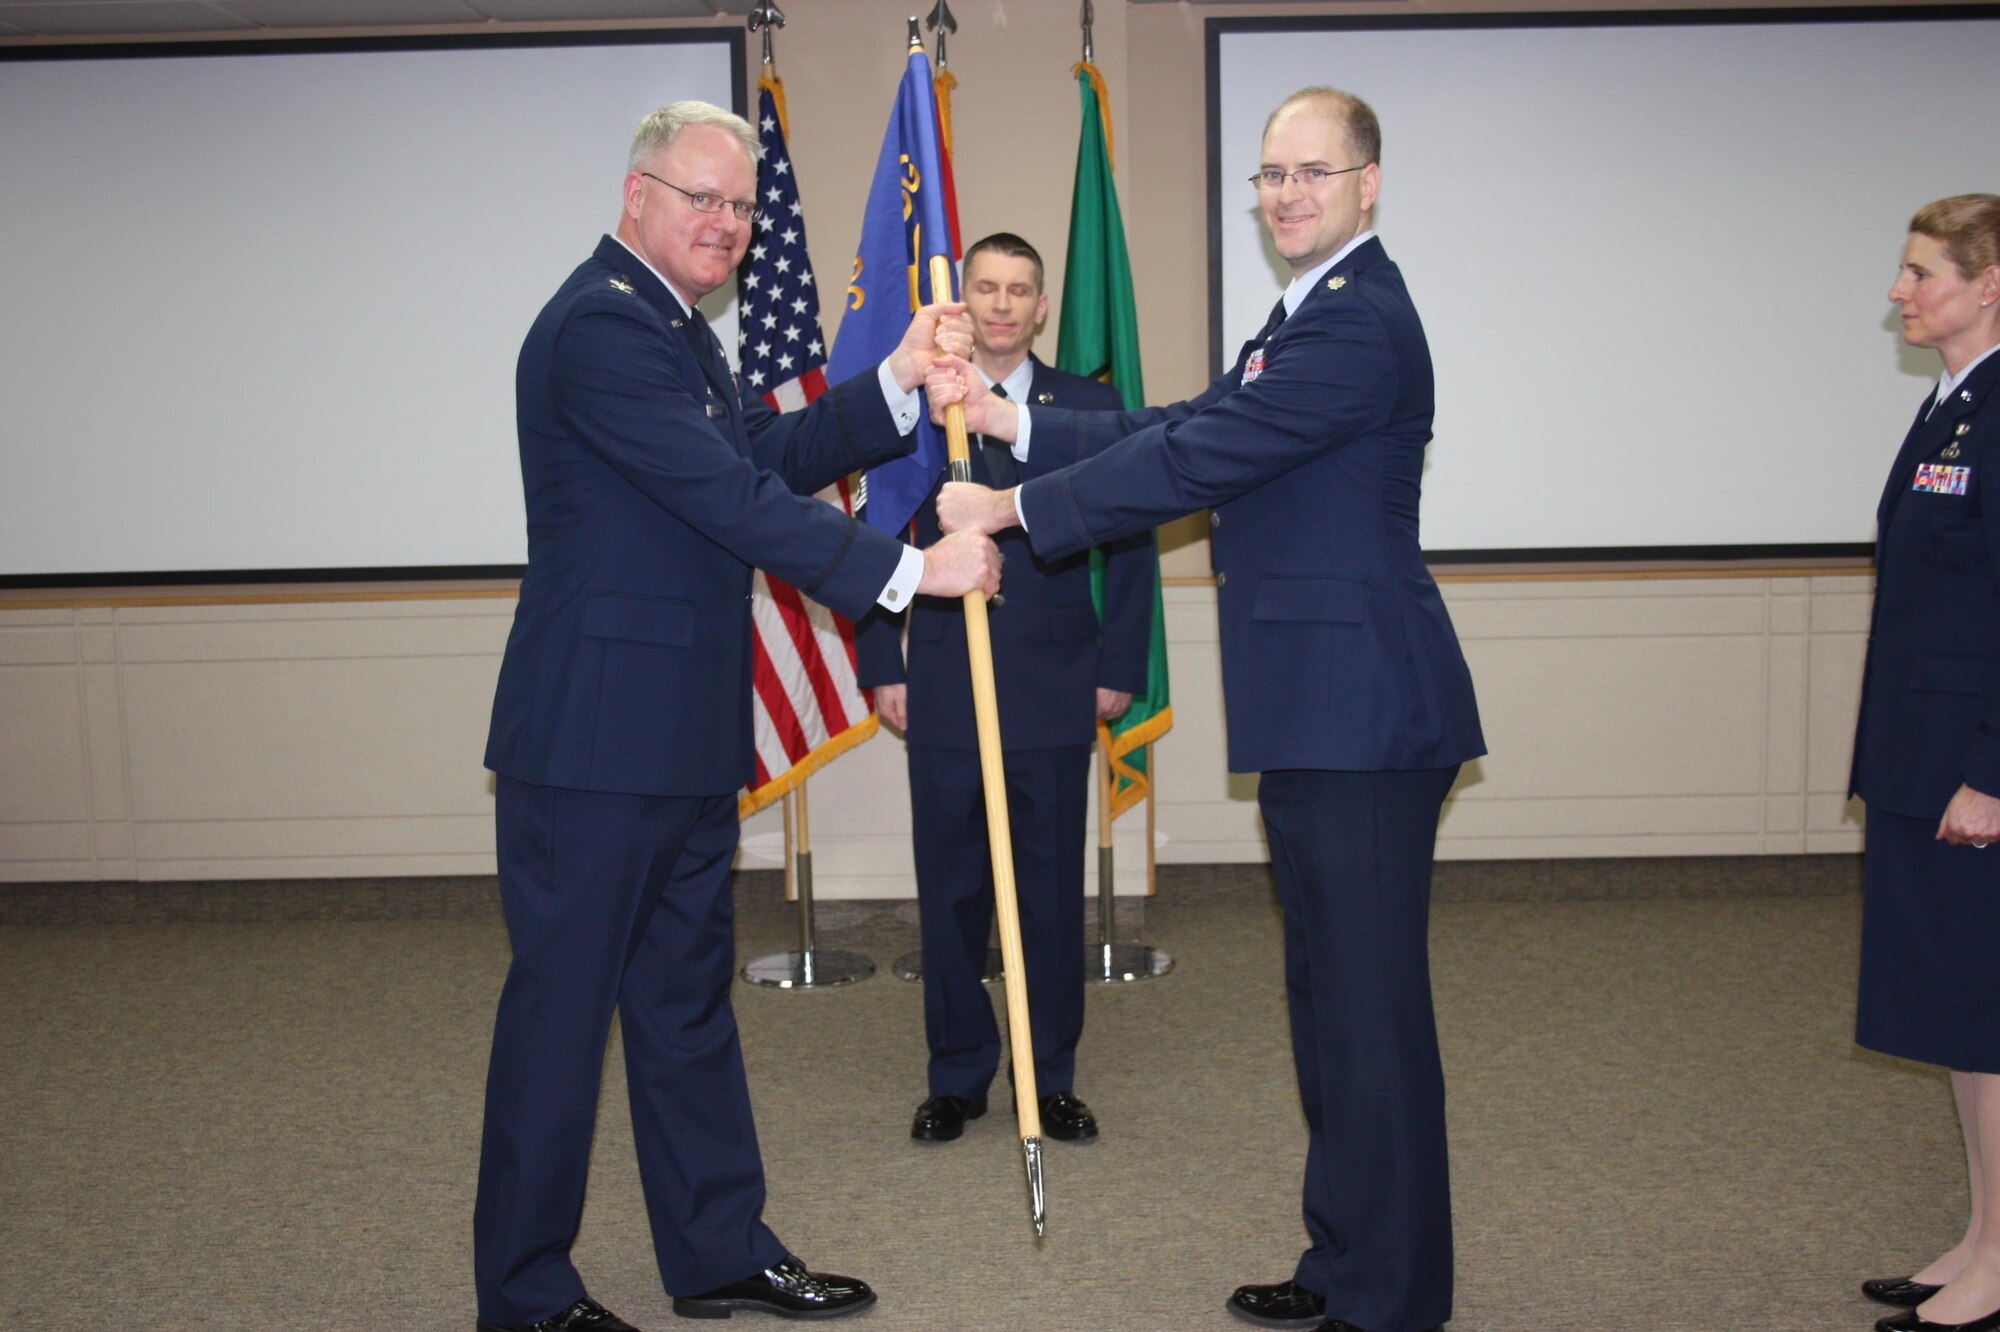 Col. William Krueger, 225th Air Defense Group commander, hands off the guidon to Lt. Col. Brett Bosselmann, 225th Air Defense Squadron commander, during the 225th Air Defense Squadron change of command at the Western Air Defense Sector at Joint Base Lewis-McChord, Wash., Jan. 29, 2016. The 225th ADG is a subordinate unit of the 225th Air Defense Group, which conducts the Western Air Defense Sector's (WADS) mission. WADS is responsible for air sovereignty and counter-air operations over the western United States and directs a variety of assets to defend 2.2 million square miles of land and sea. (U.S. Air National Guard photo by 1st Lt. Colette Muller/Released)